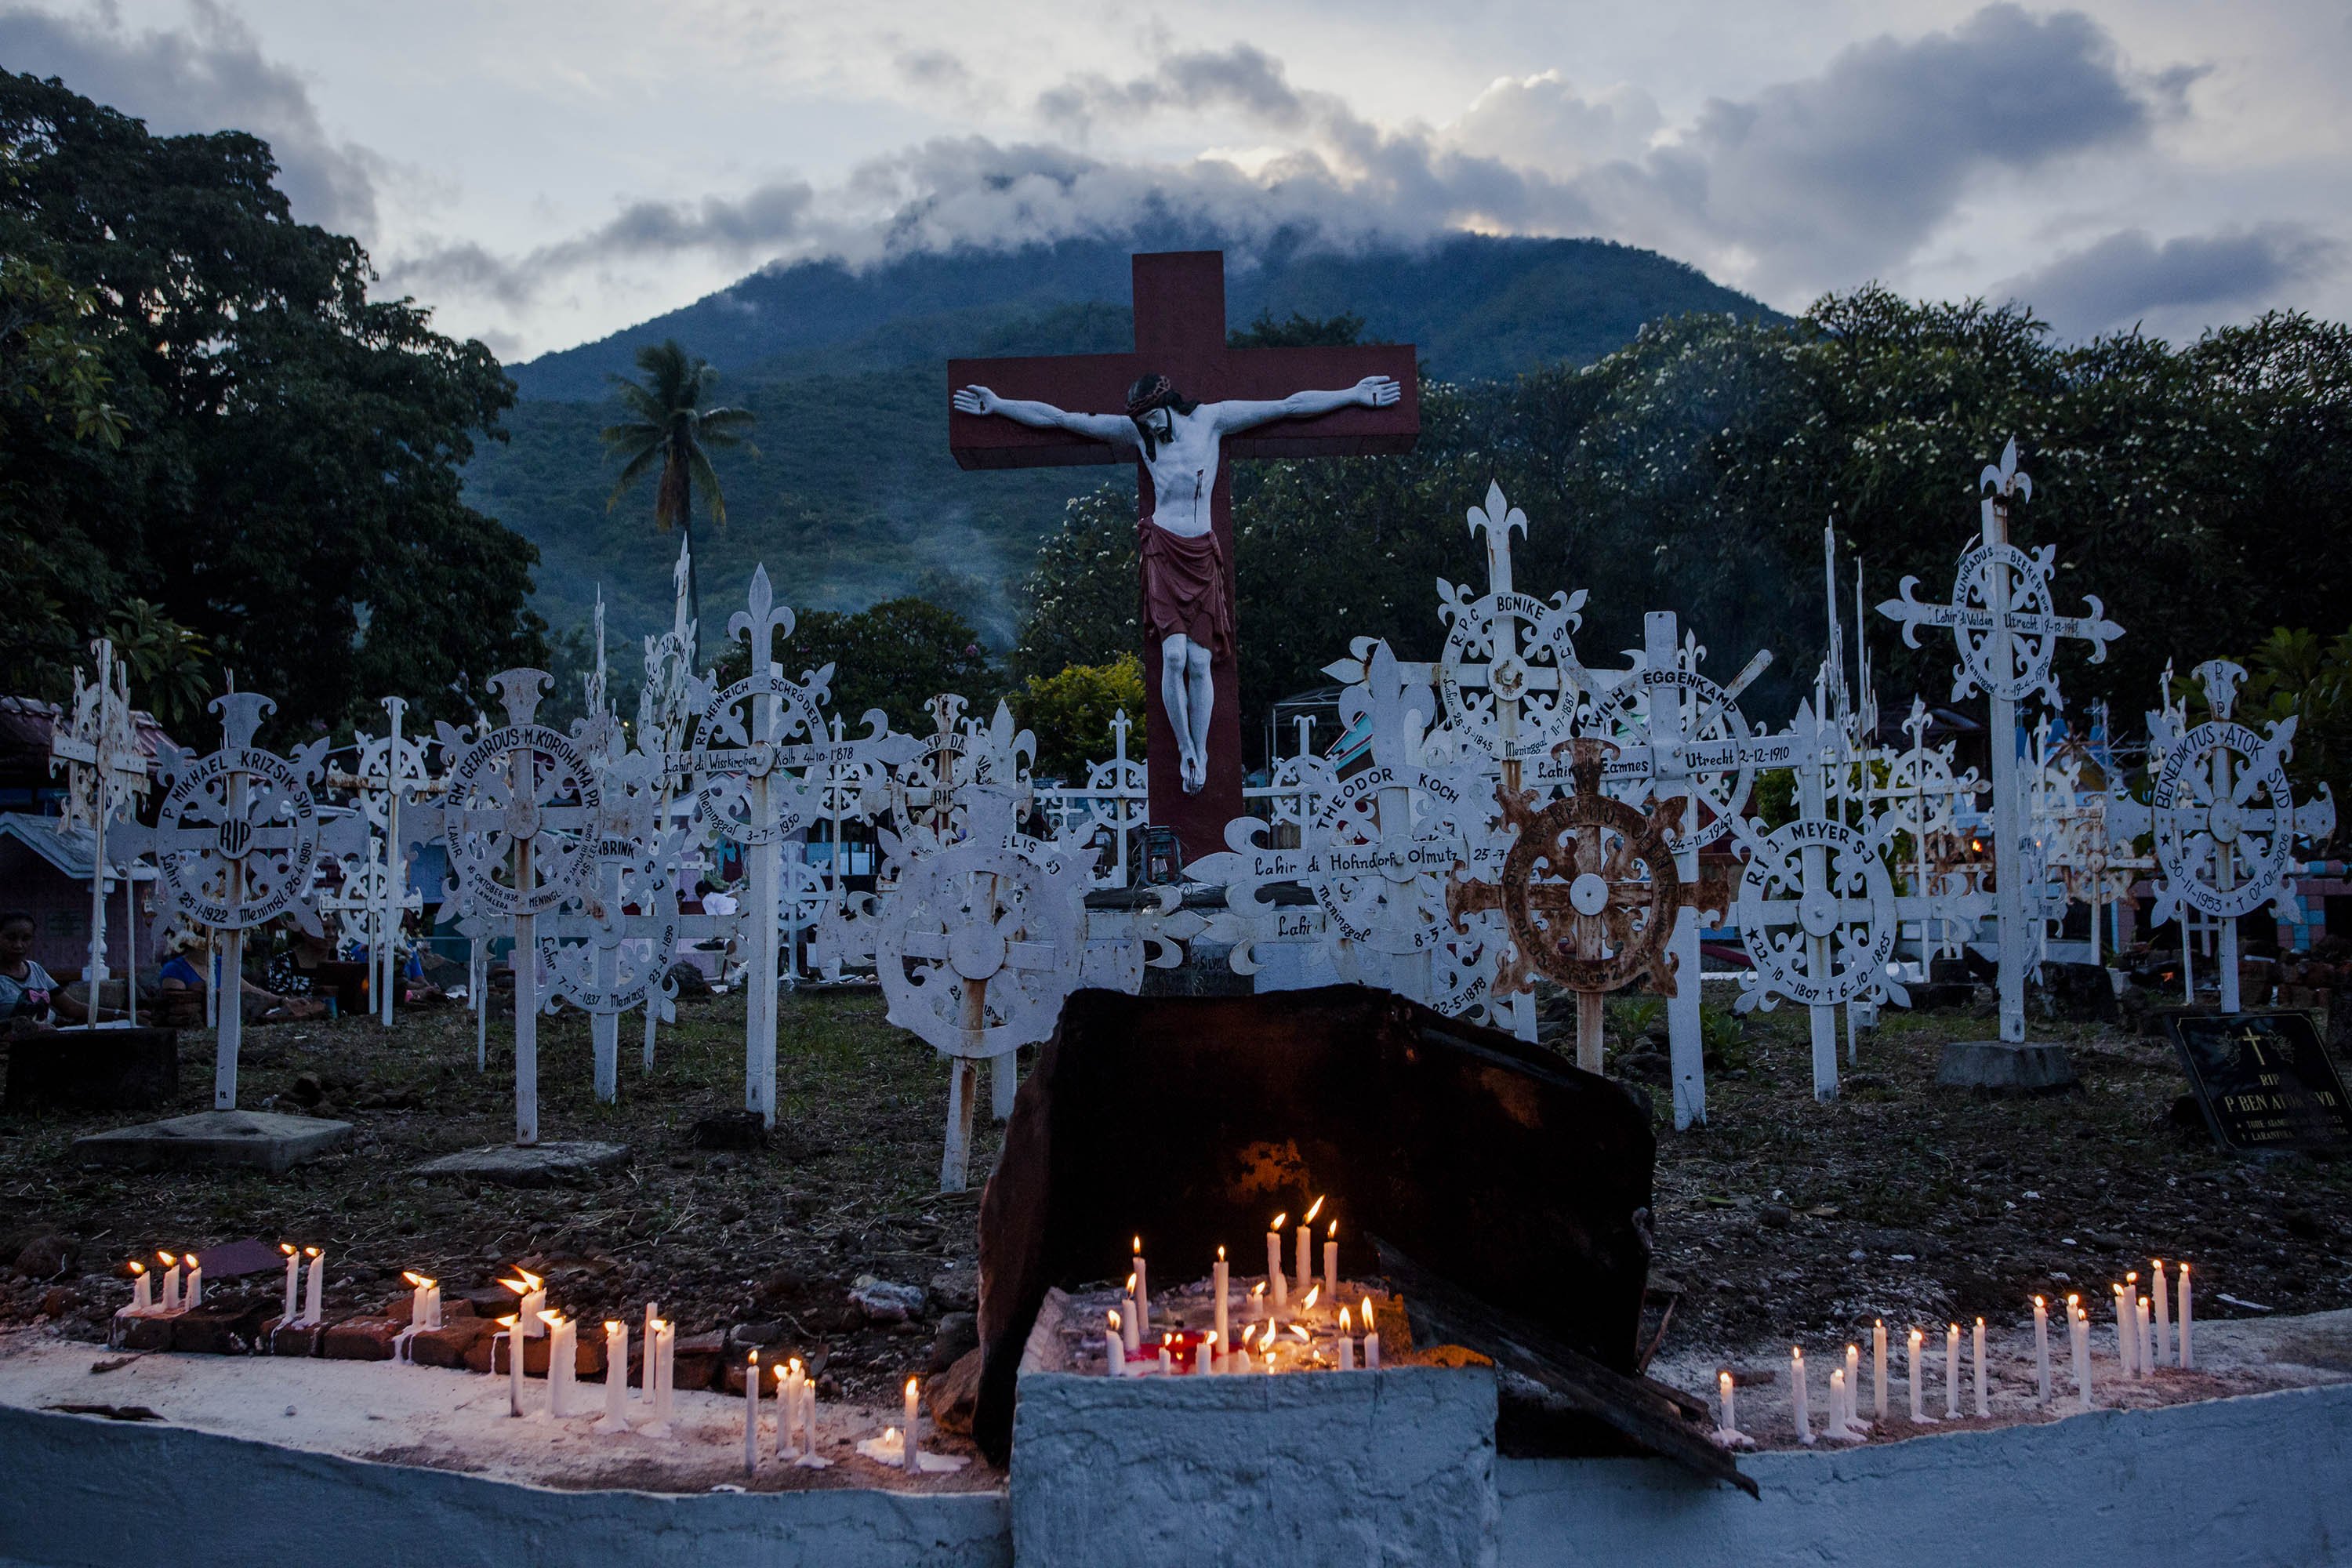 Apr. 16, 2014. Candle lights at the tombs during Holy Week celebrations, known as 'Semana Santa' in Larantuka, East Nusa Tenggara, Indonesia. Easter celebrations in Larantuka started in the 16th century, when Portuguese missionaries entered and acculturated the local people.